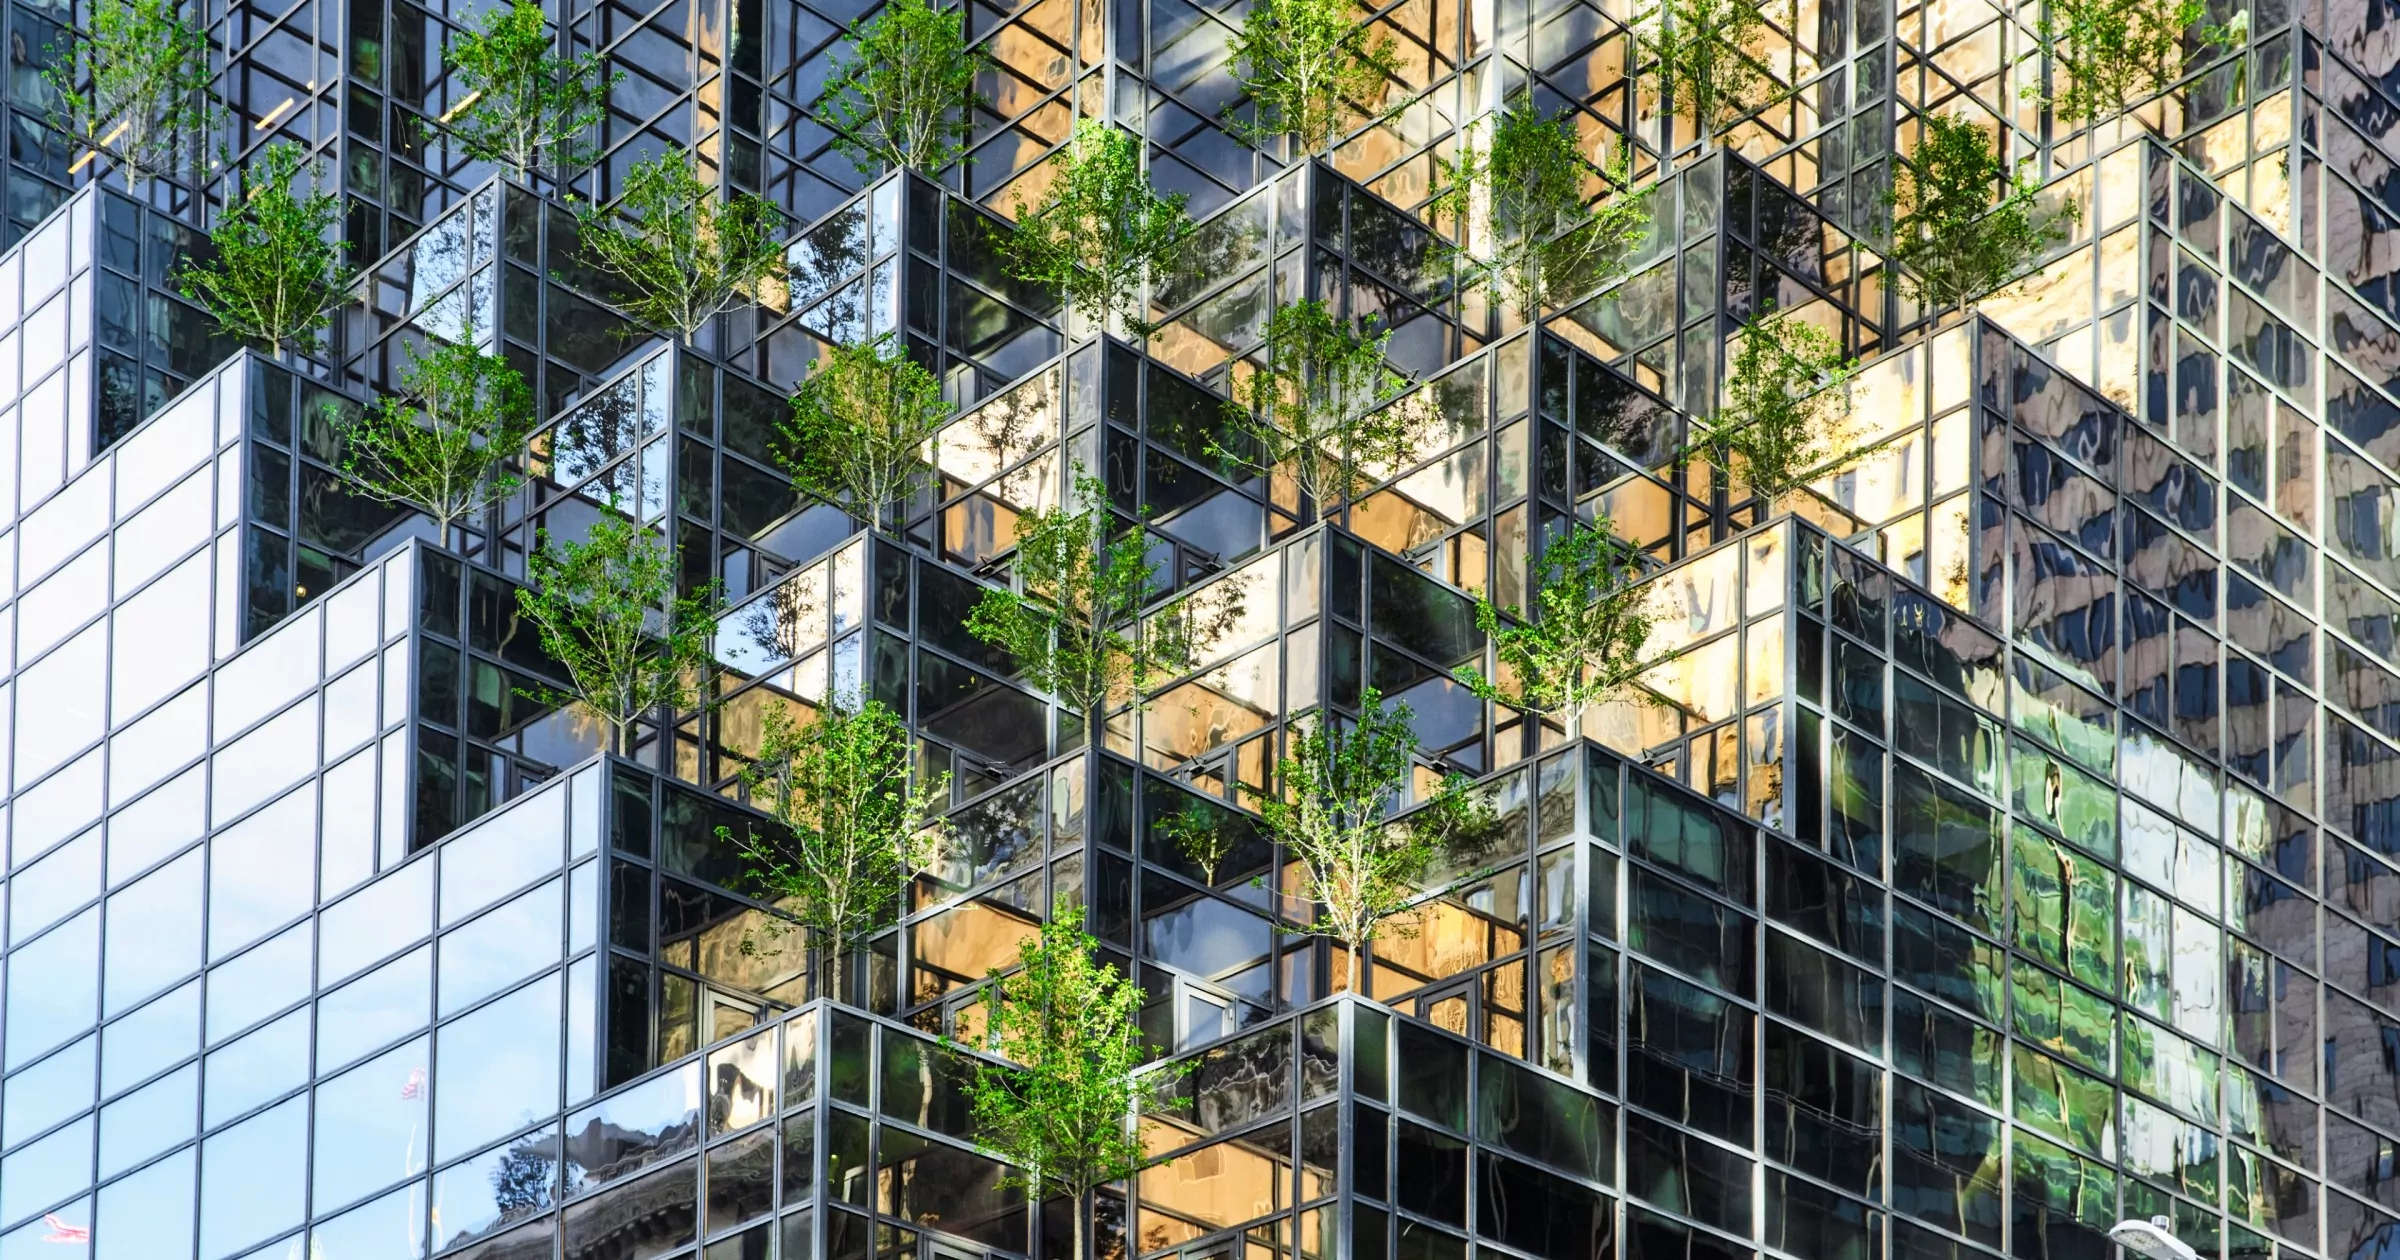 Mirrored office building with trees